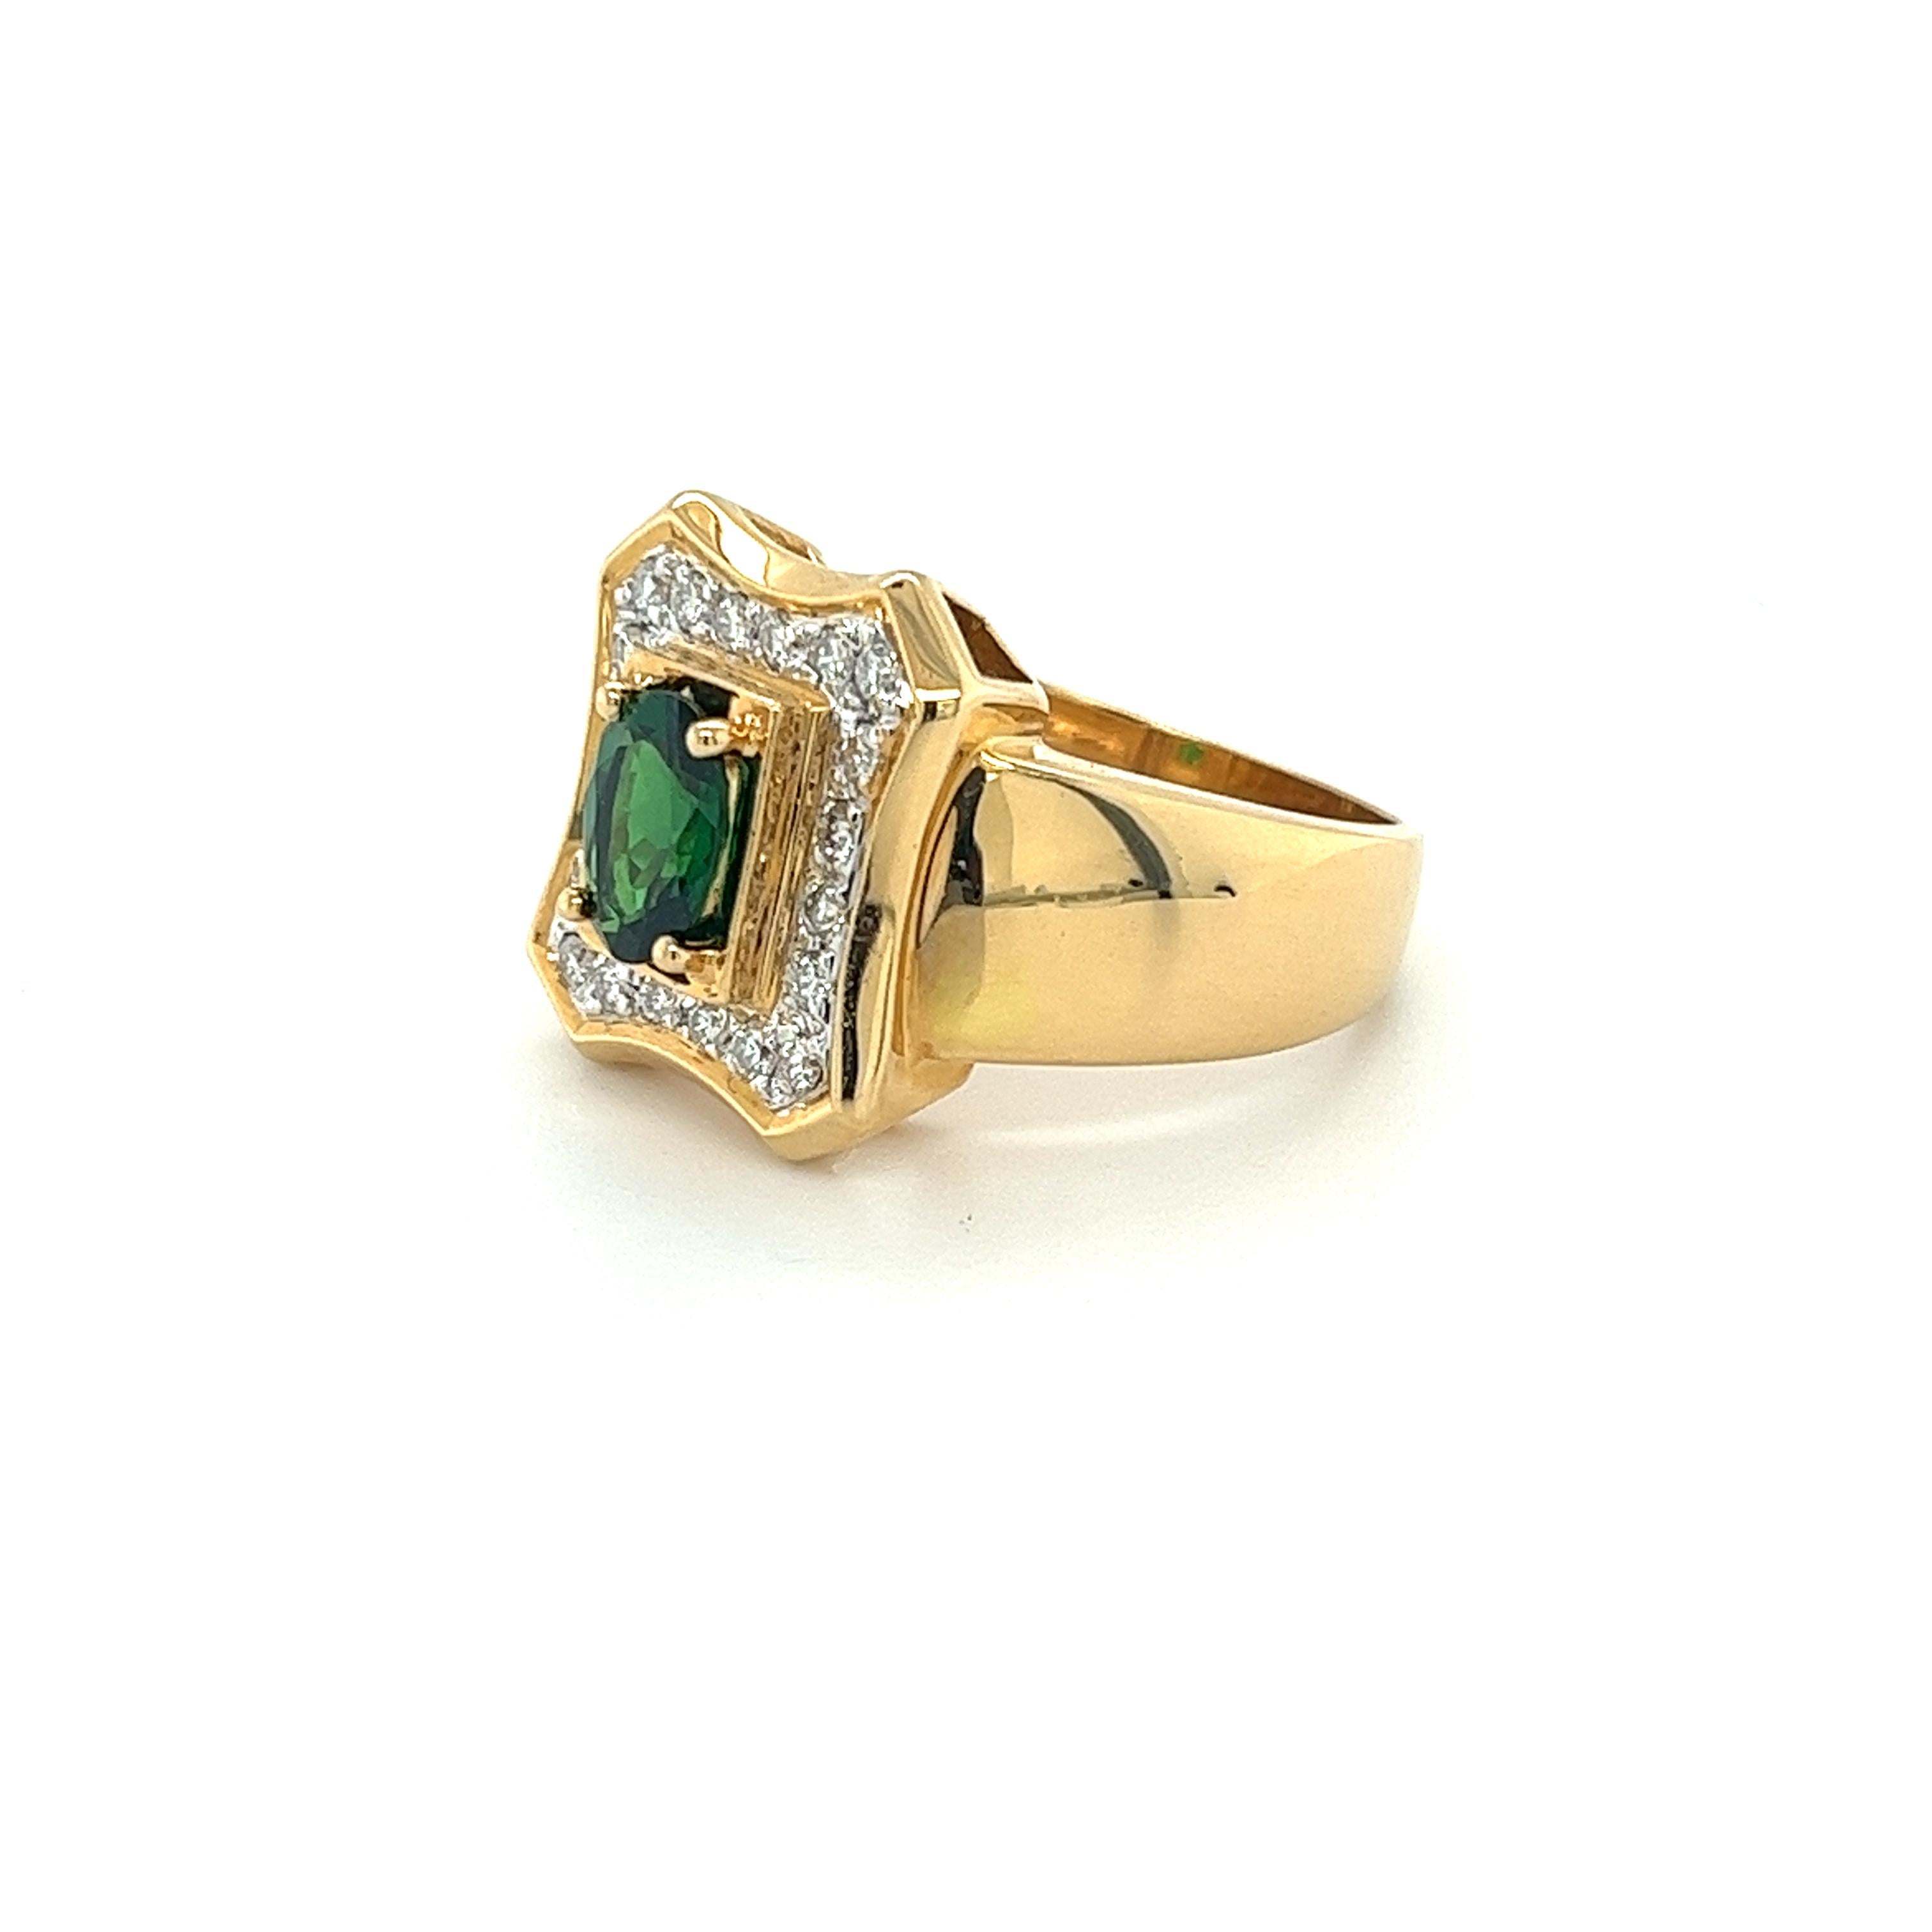 Vintage natural tsavorite and diamond ring, featuring an oval cut natural green tsavorite center stone. This ring is paired with round-cut diamond side stones totaling 0.60 carats in weight. All gems are secured with a prong setting within the 18k